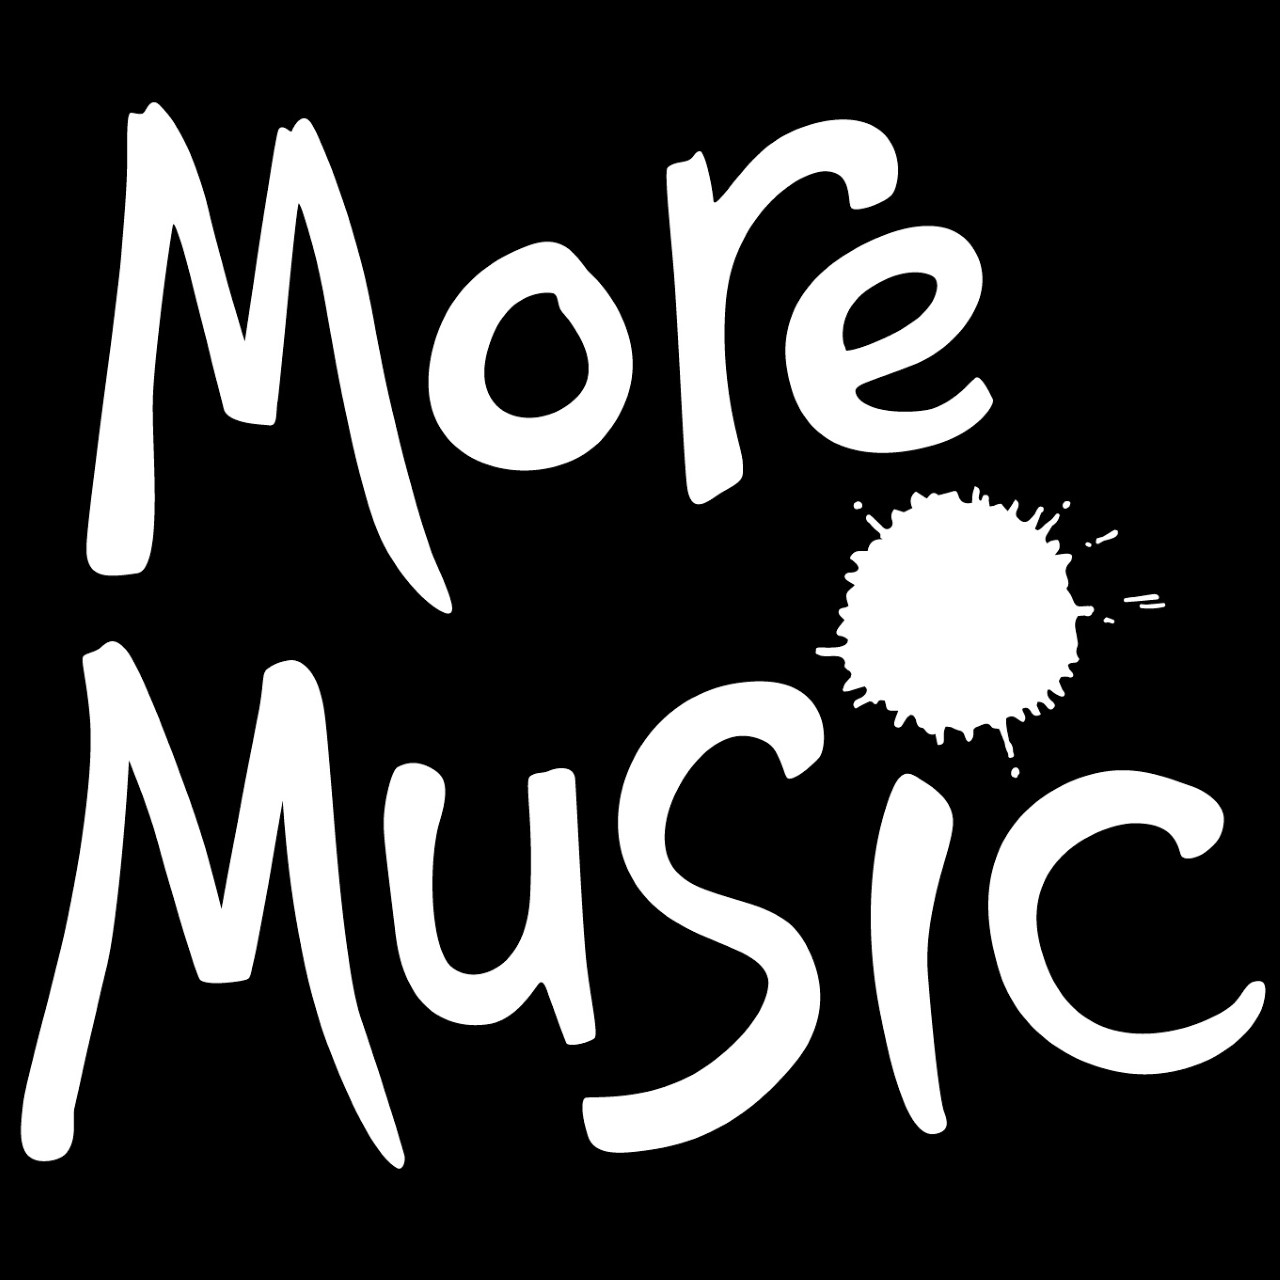 Trustee of the More Music in Morecambe Charity [2010-2014] - David Wood